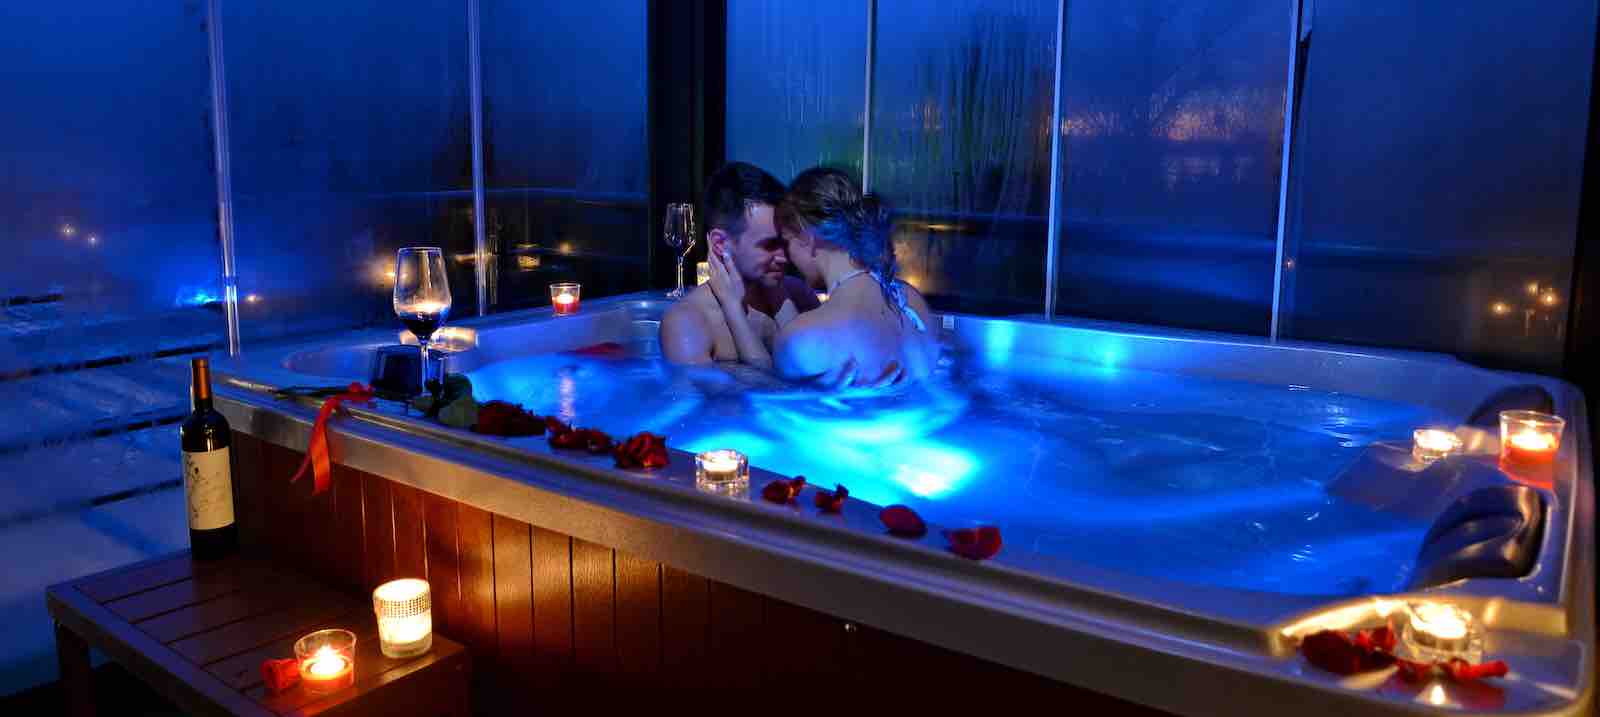 A couple embracing in a jacuzzi with some candles and a bottle of champagne with the lights off but with the chromotherapy lights on